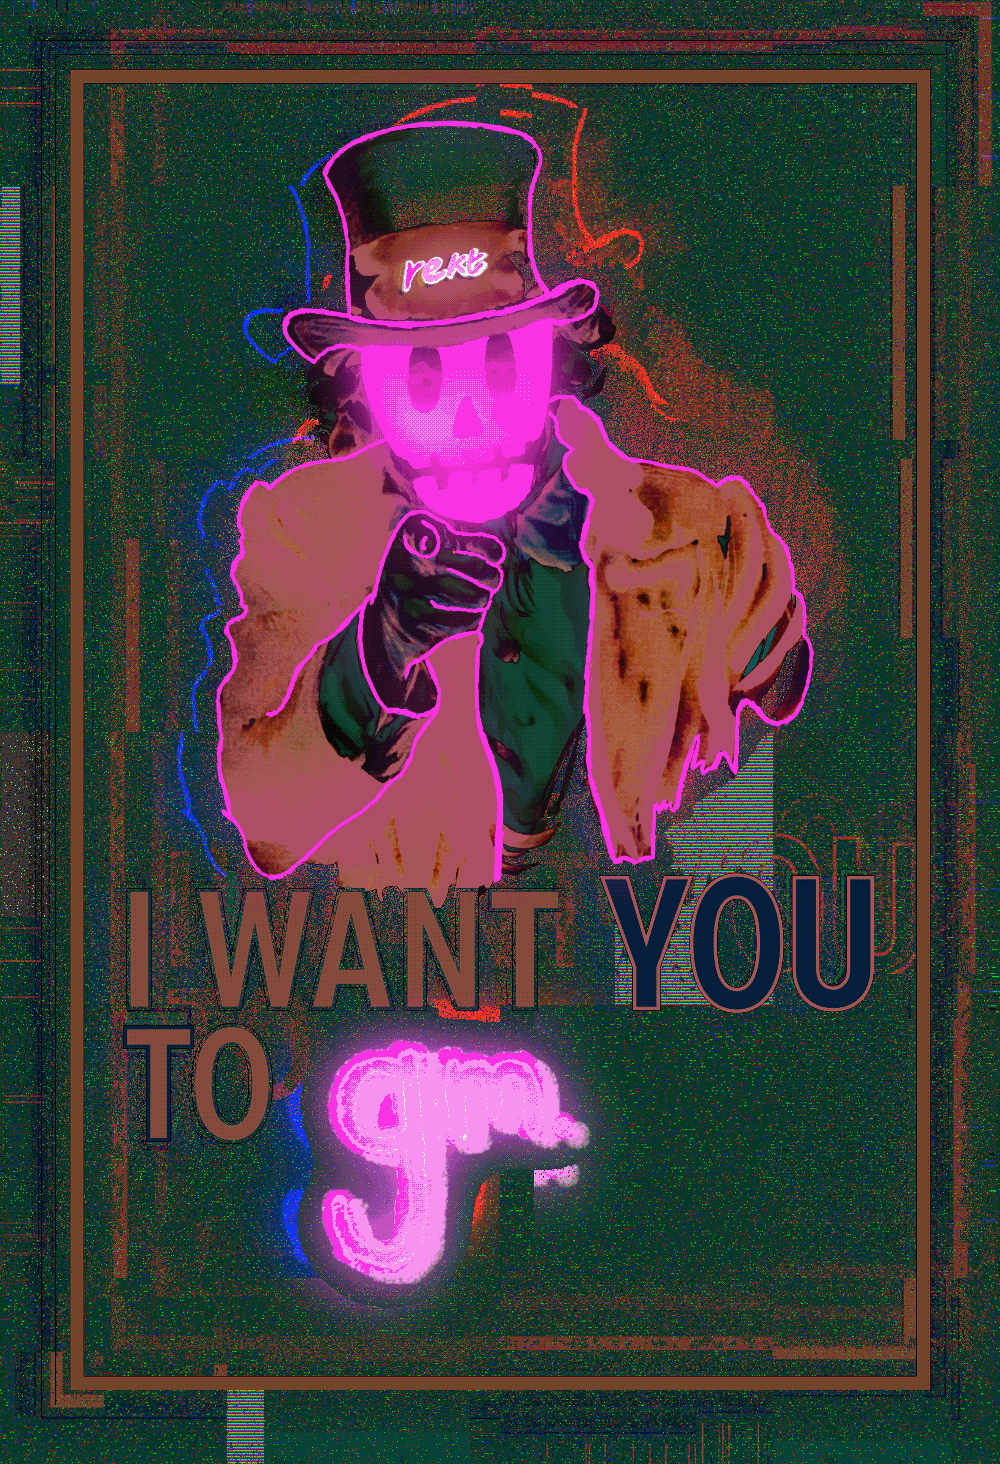 I want you to gm